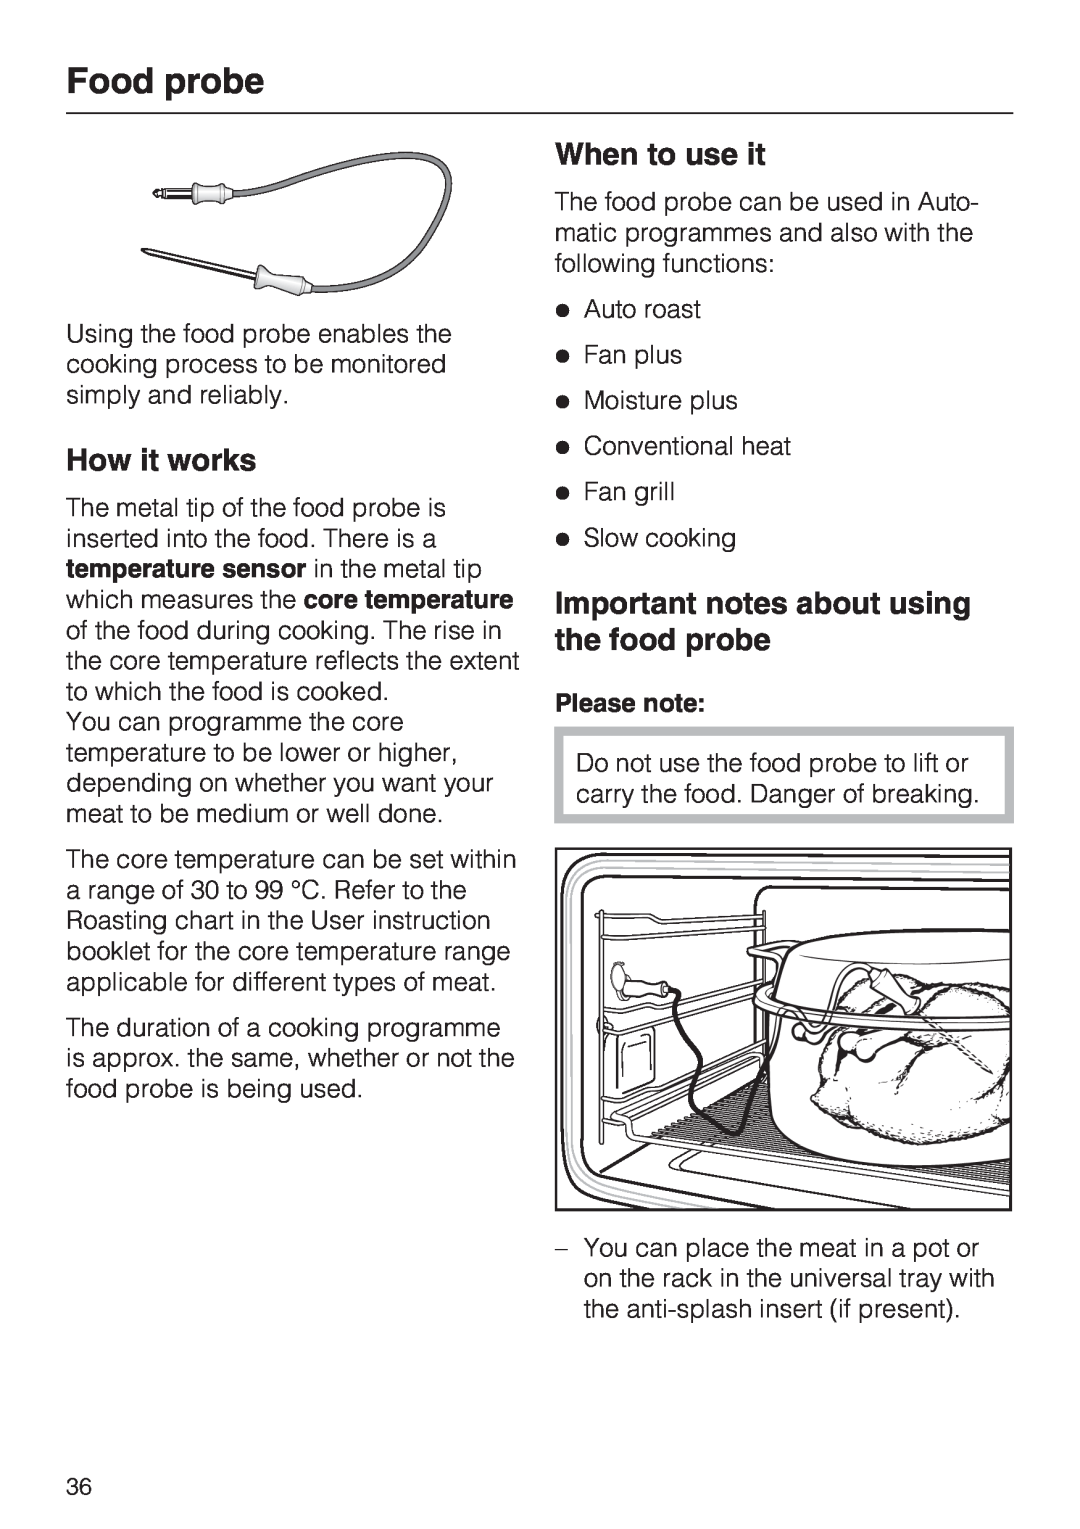 Miele H 5961 B Food probe, How it works, When to use it, Important notes about using the food probe, Please note 